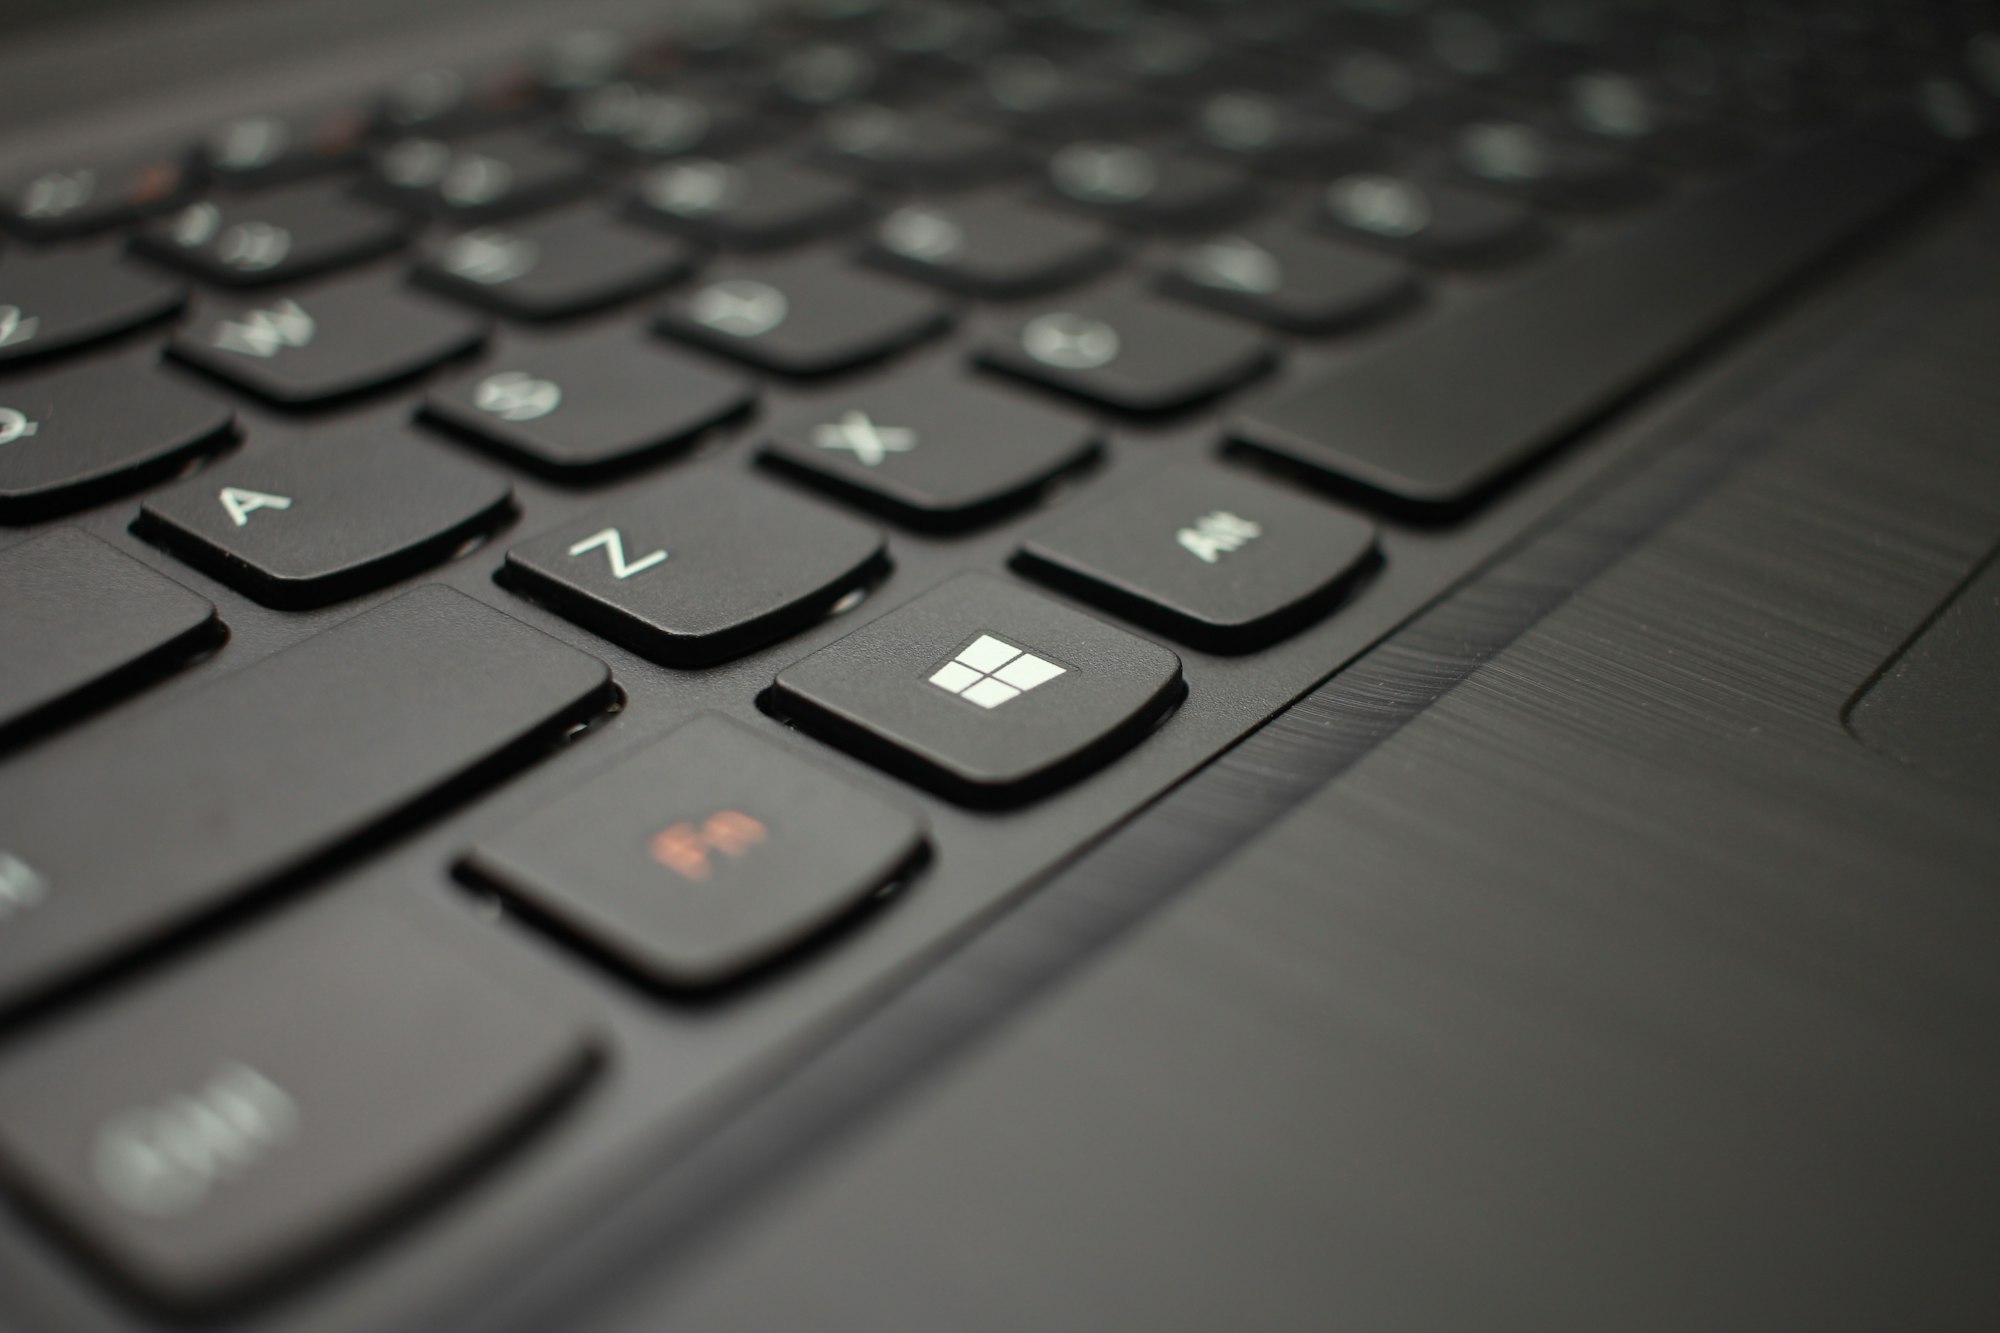 How To Turn Off Keyboard Sounds On Your Windows Laptop